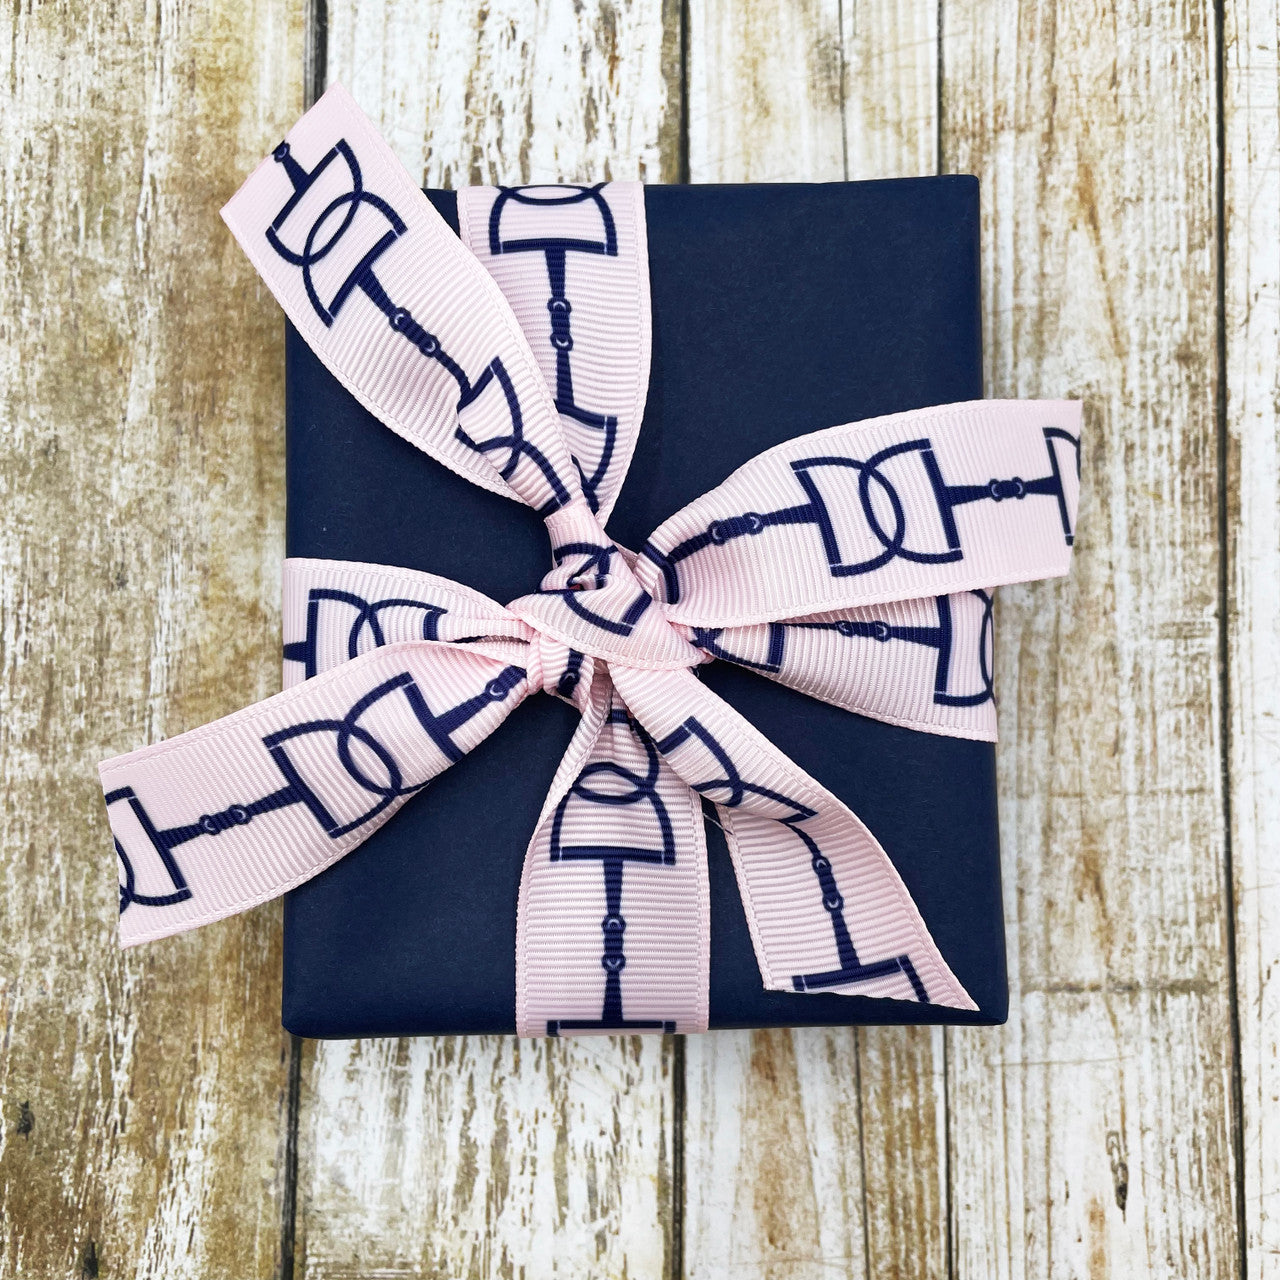 Snaffle bit ribbon with black or navy bits printed on 7/8"white or pink  single grosgrain